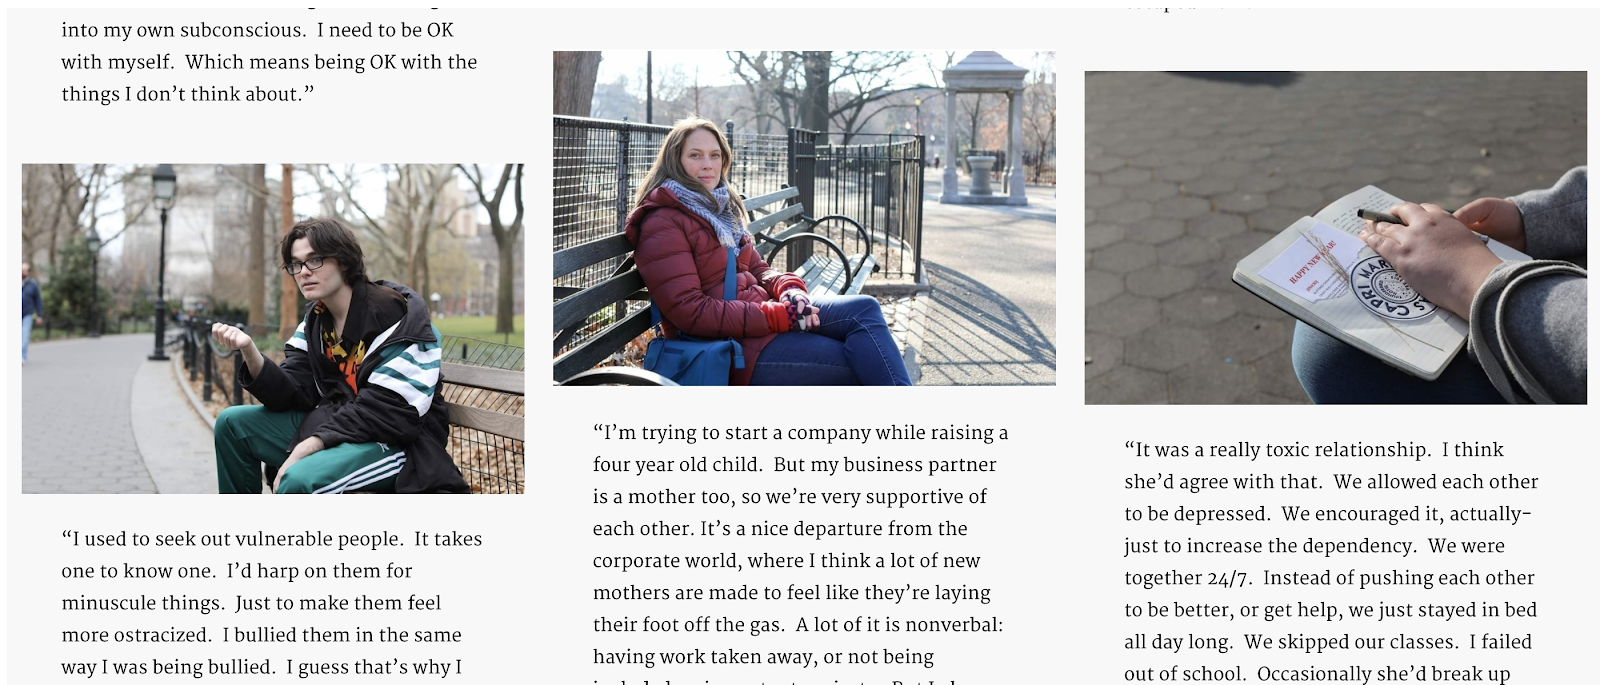 Humans of New York Blog Layout Screenshot (Stories Using Images Example)